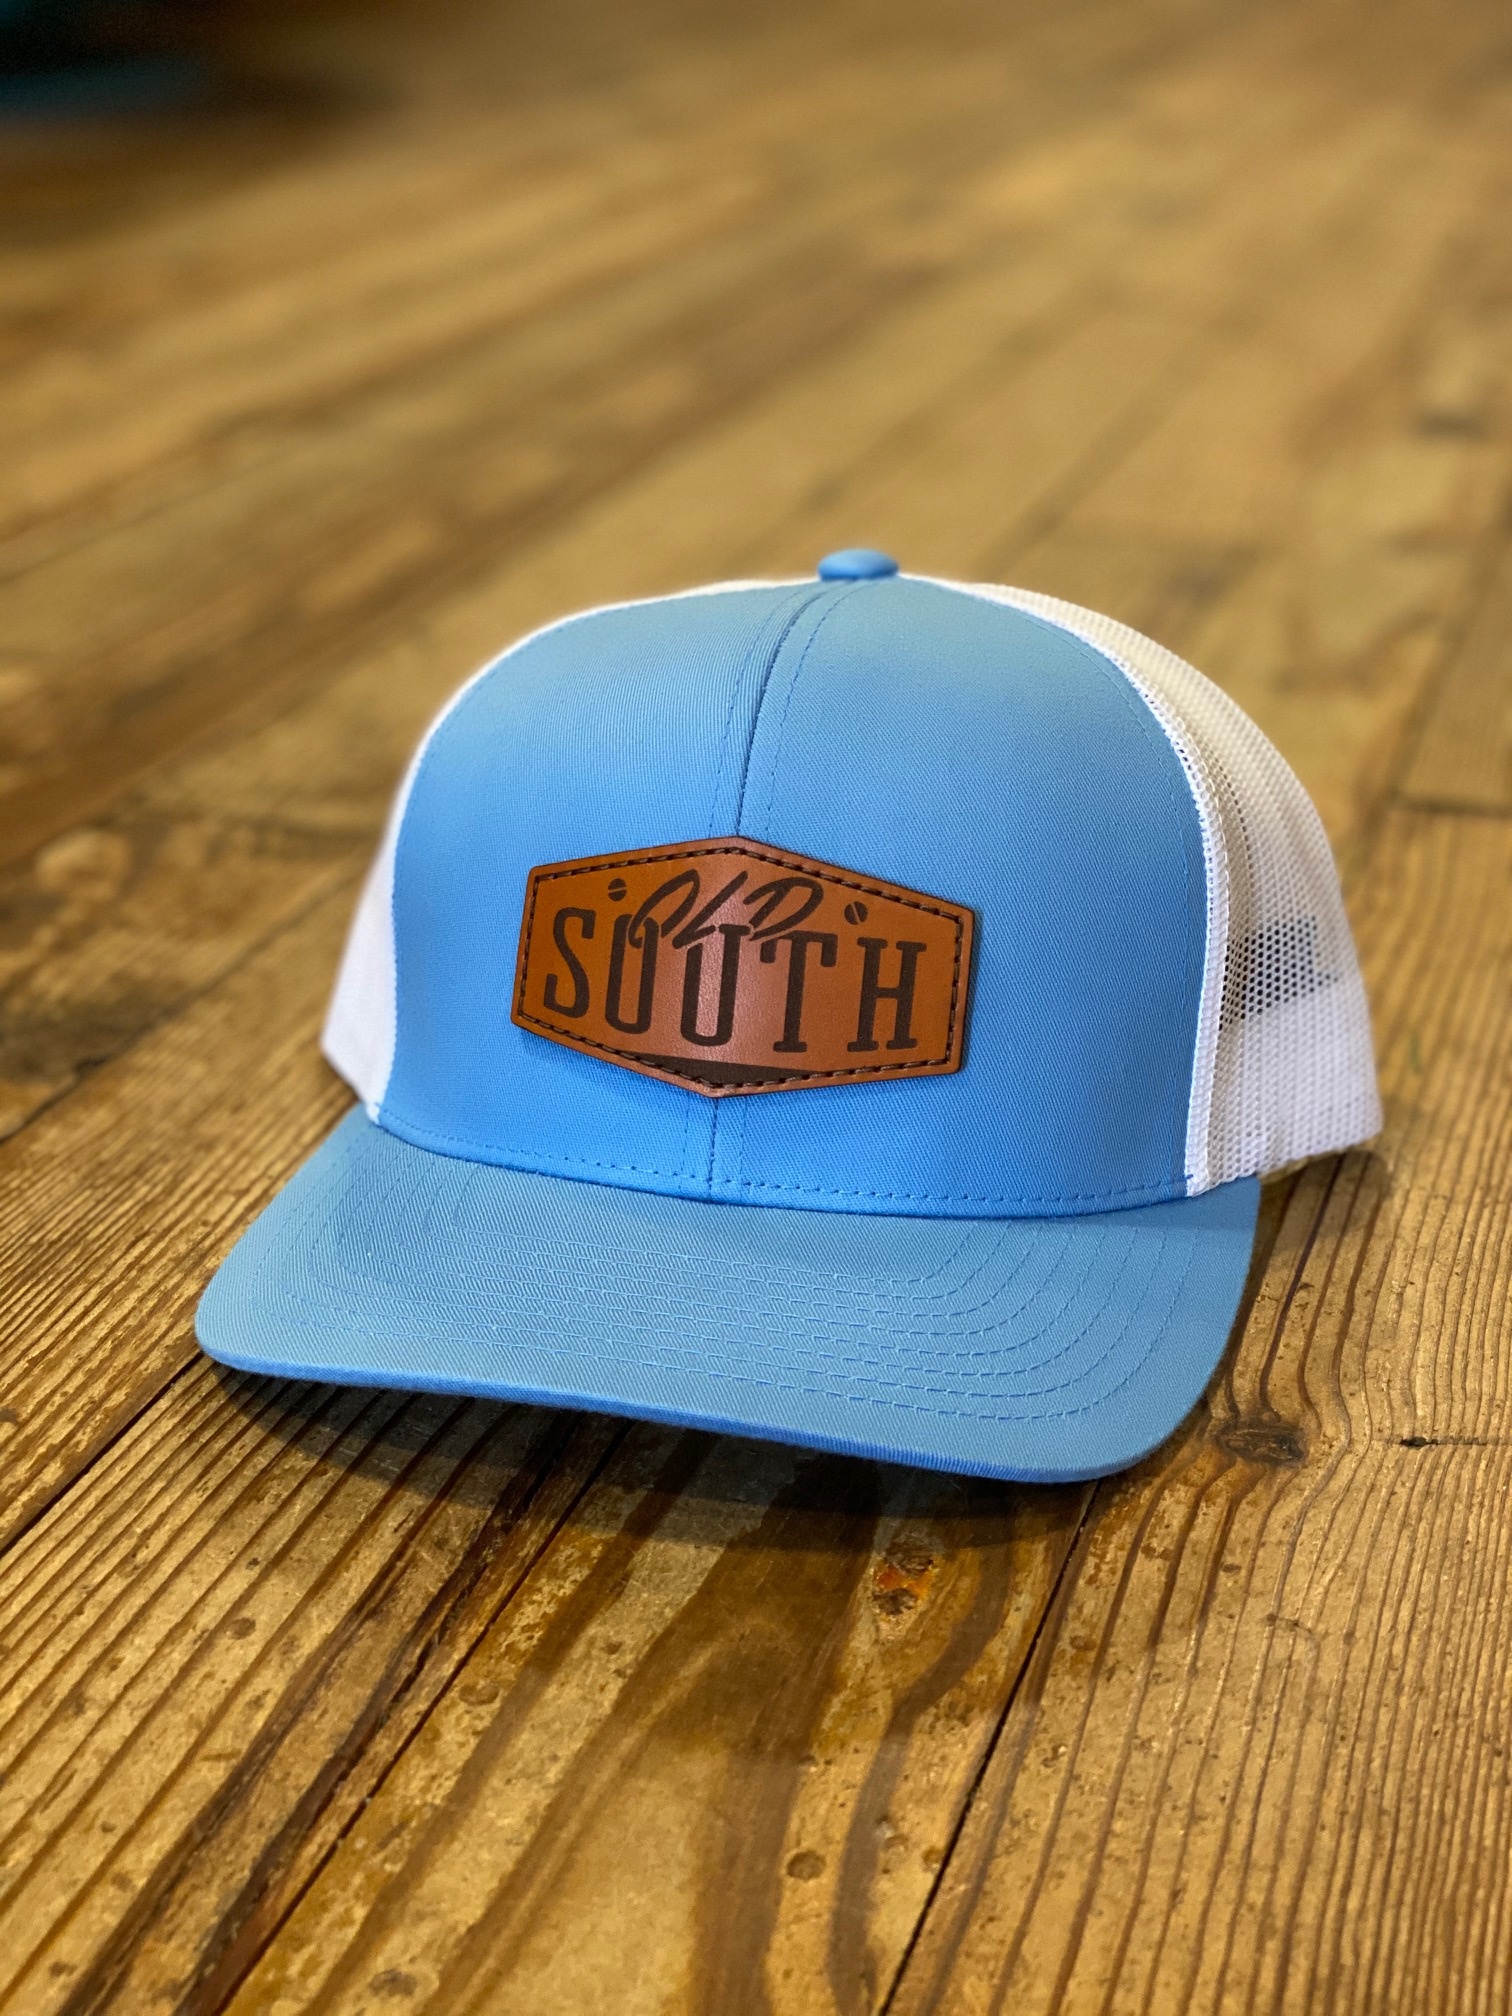 Old South Old South Leather Patch Trucker Hat Carolina Blue and White